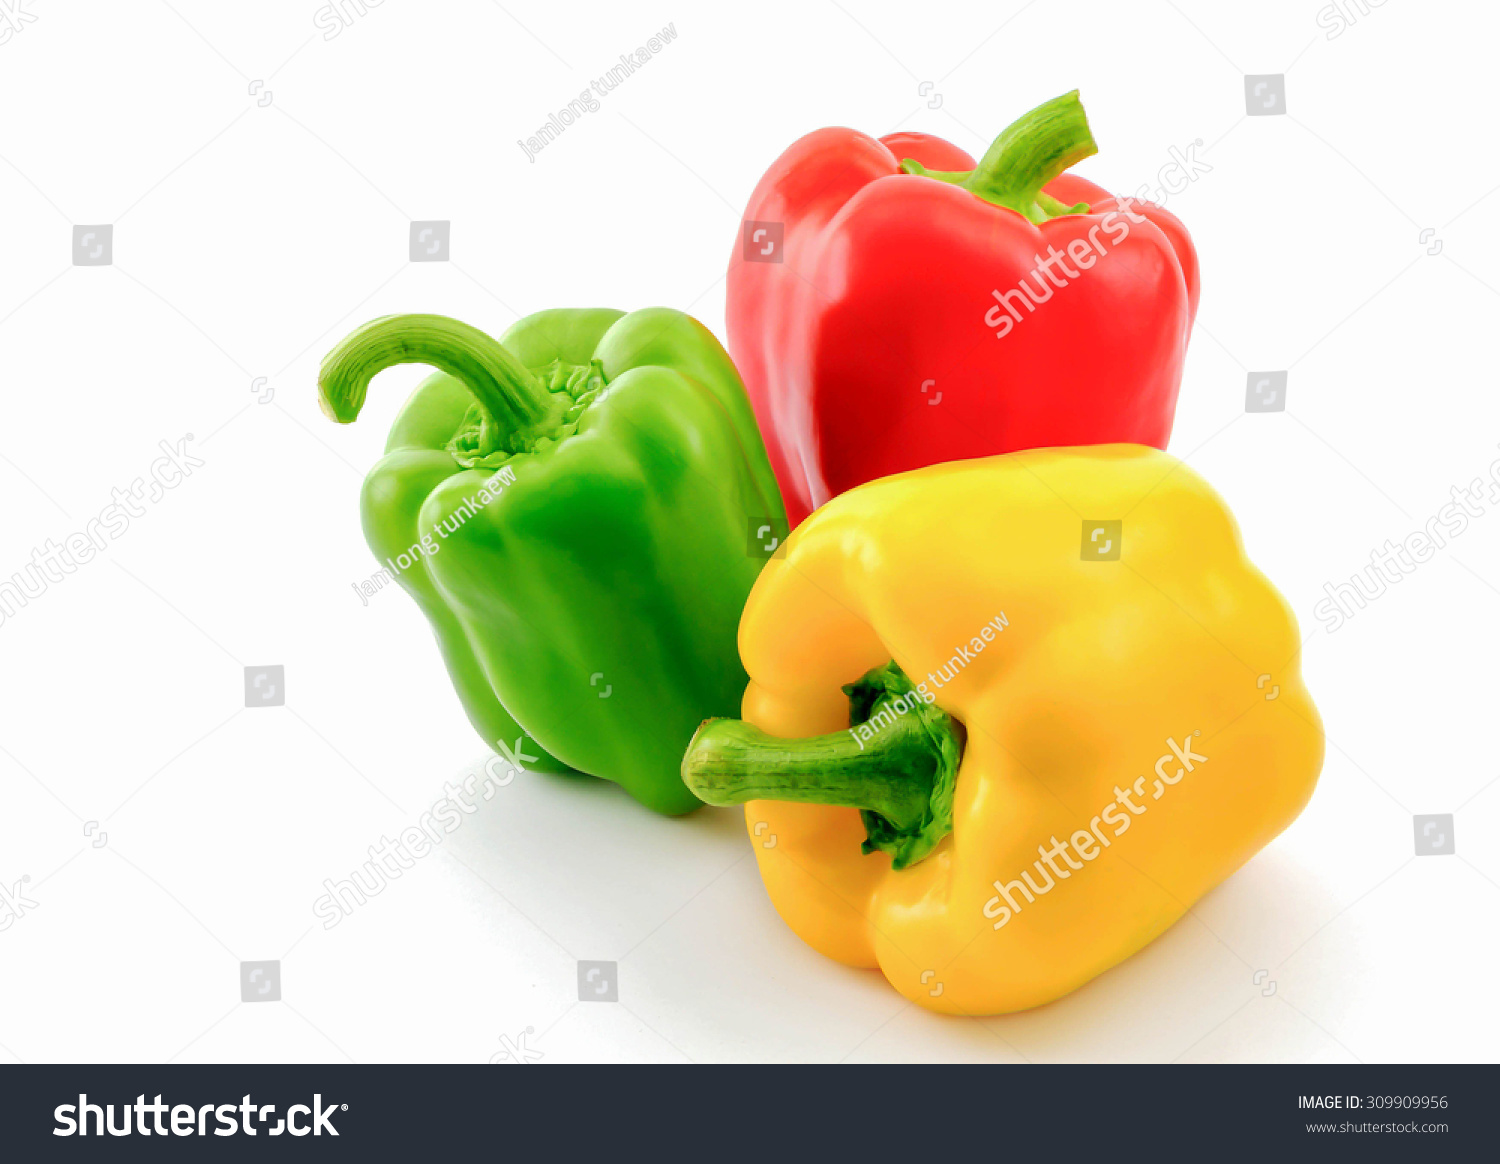 Paprika is a cultivar of the species Capsicum annuum paprika yield different colors, including red, yellow, orange and green peppers are sometimes grouped with less pungent pepper called sweet peppers #309909956